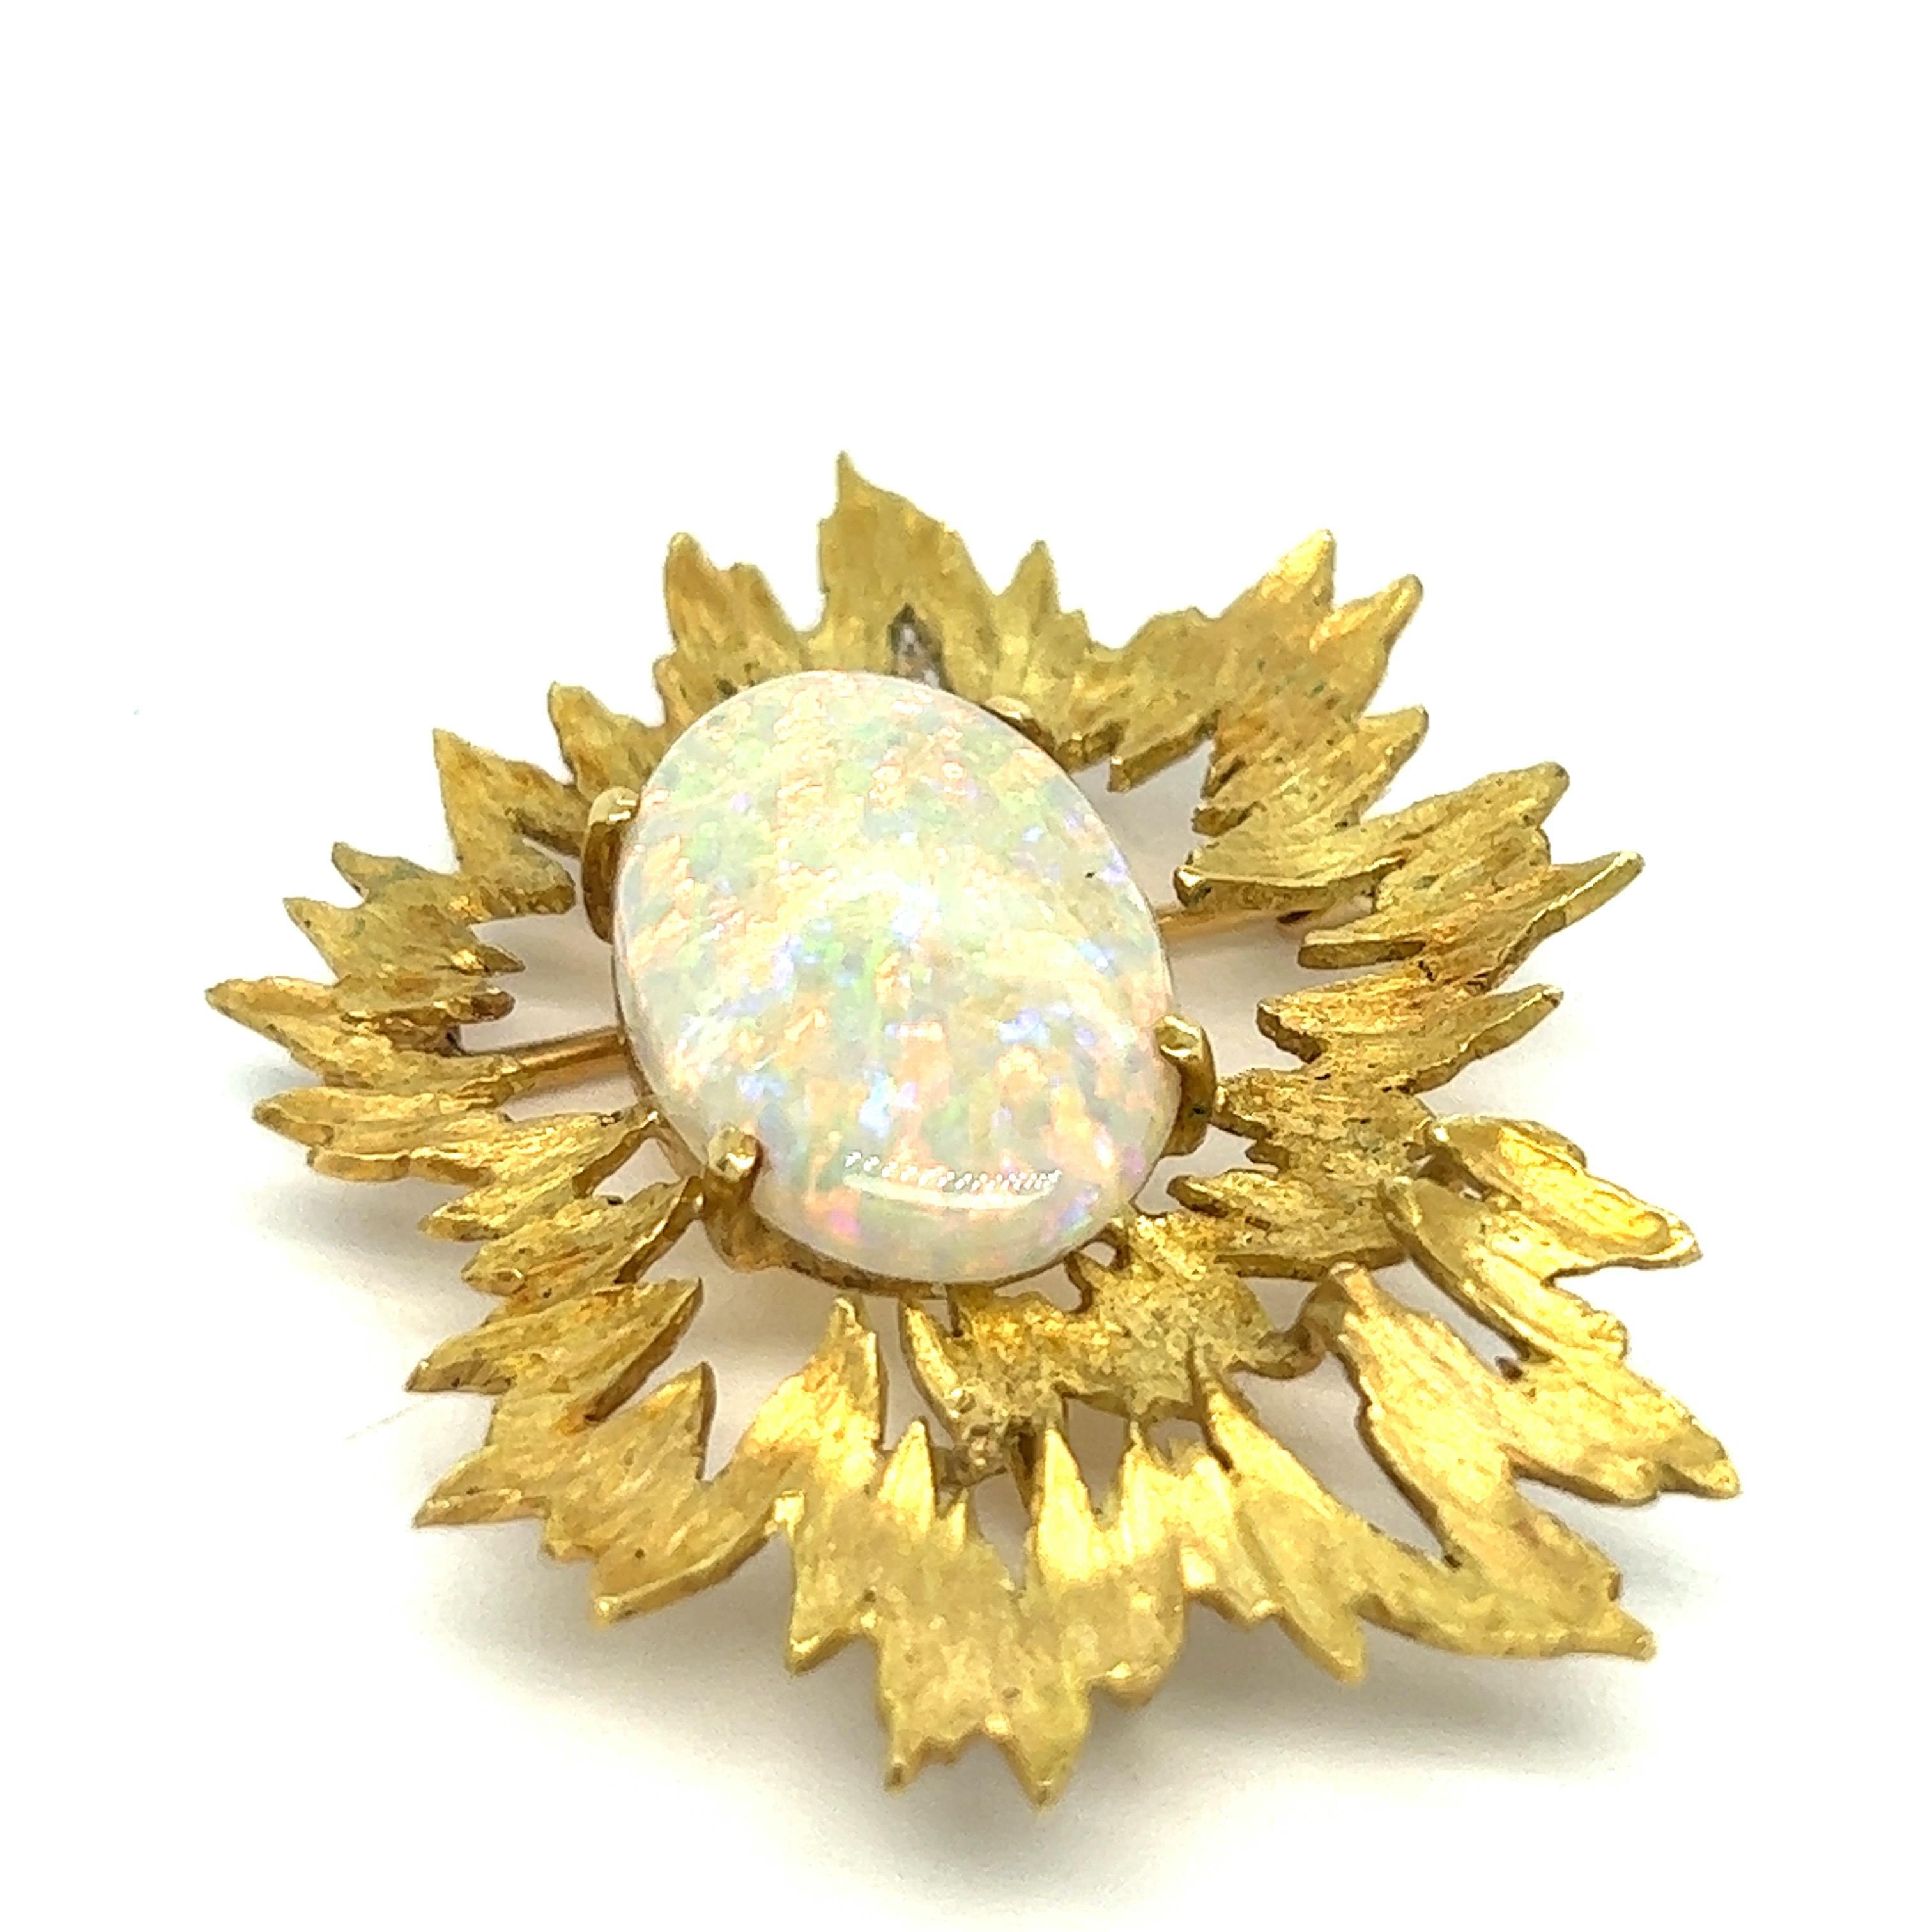 Australian opal yellow gold pendant brooch

Opal measures approximately 13 x 19.5 mm, 18 karat yellow gold; marked 18k

Size: width 1.5 inches, length 1.75 inches
Total weight: 10.6 grams